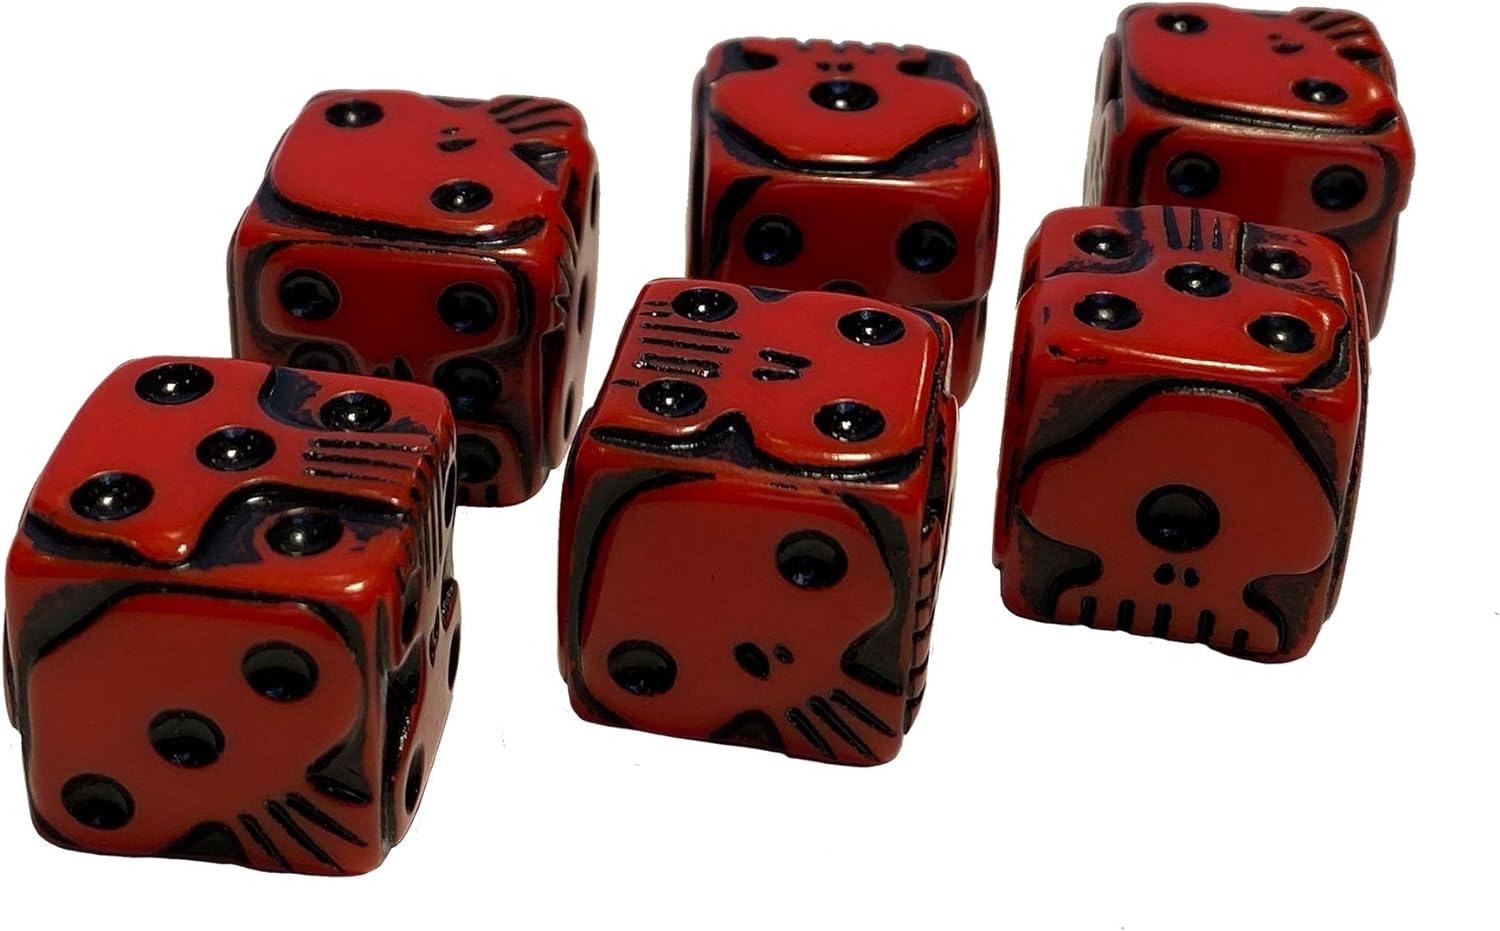 USAOPOLY Nightmare Before Christmas Premium Dice Set | Collectible d6 Dice | Red  Black Custom Dice with Collectible Tin Case | Officially Licensed Disney 6-Sided Dice (AC004-291-002000-12)